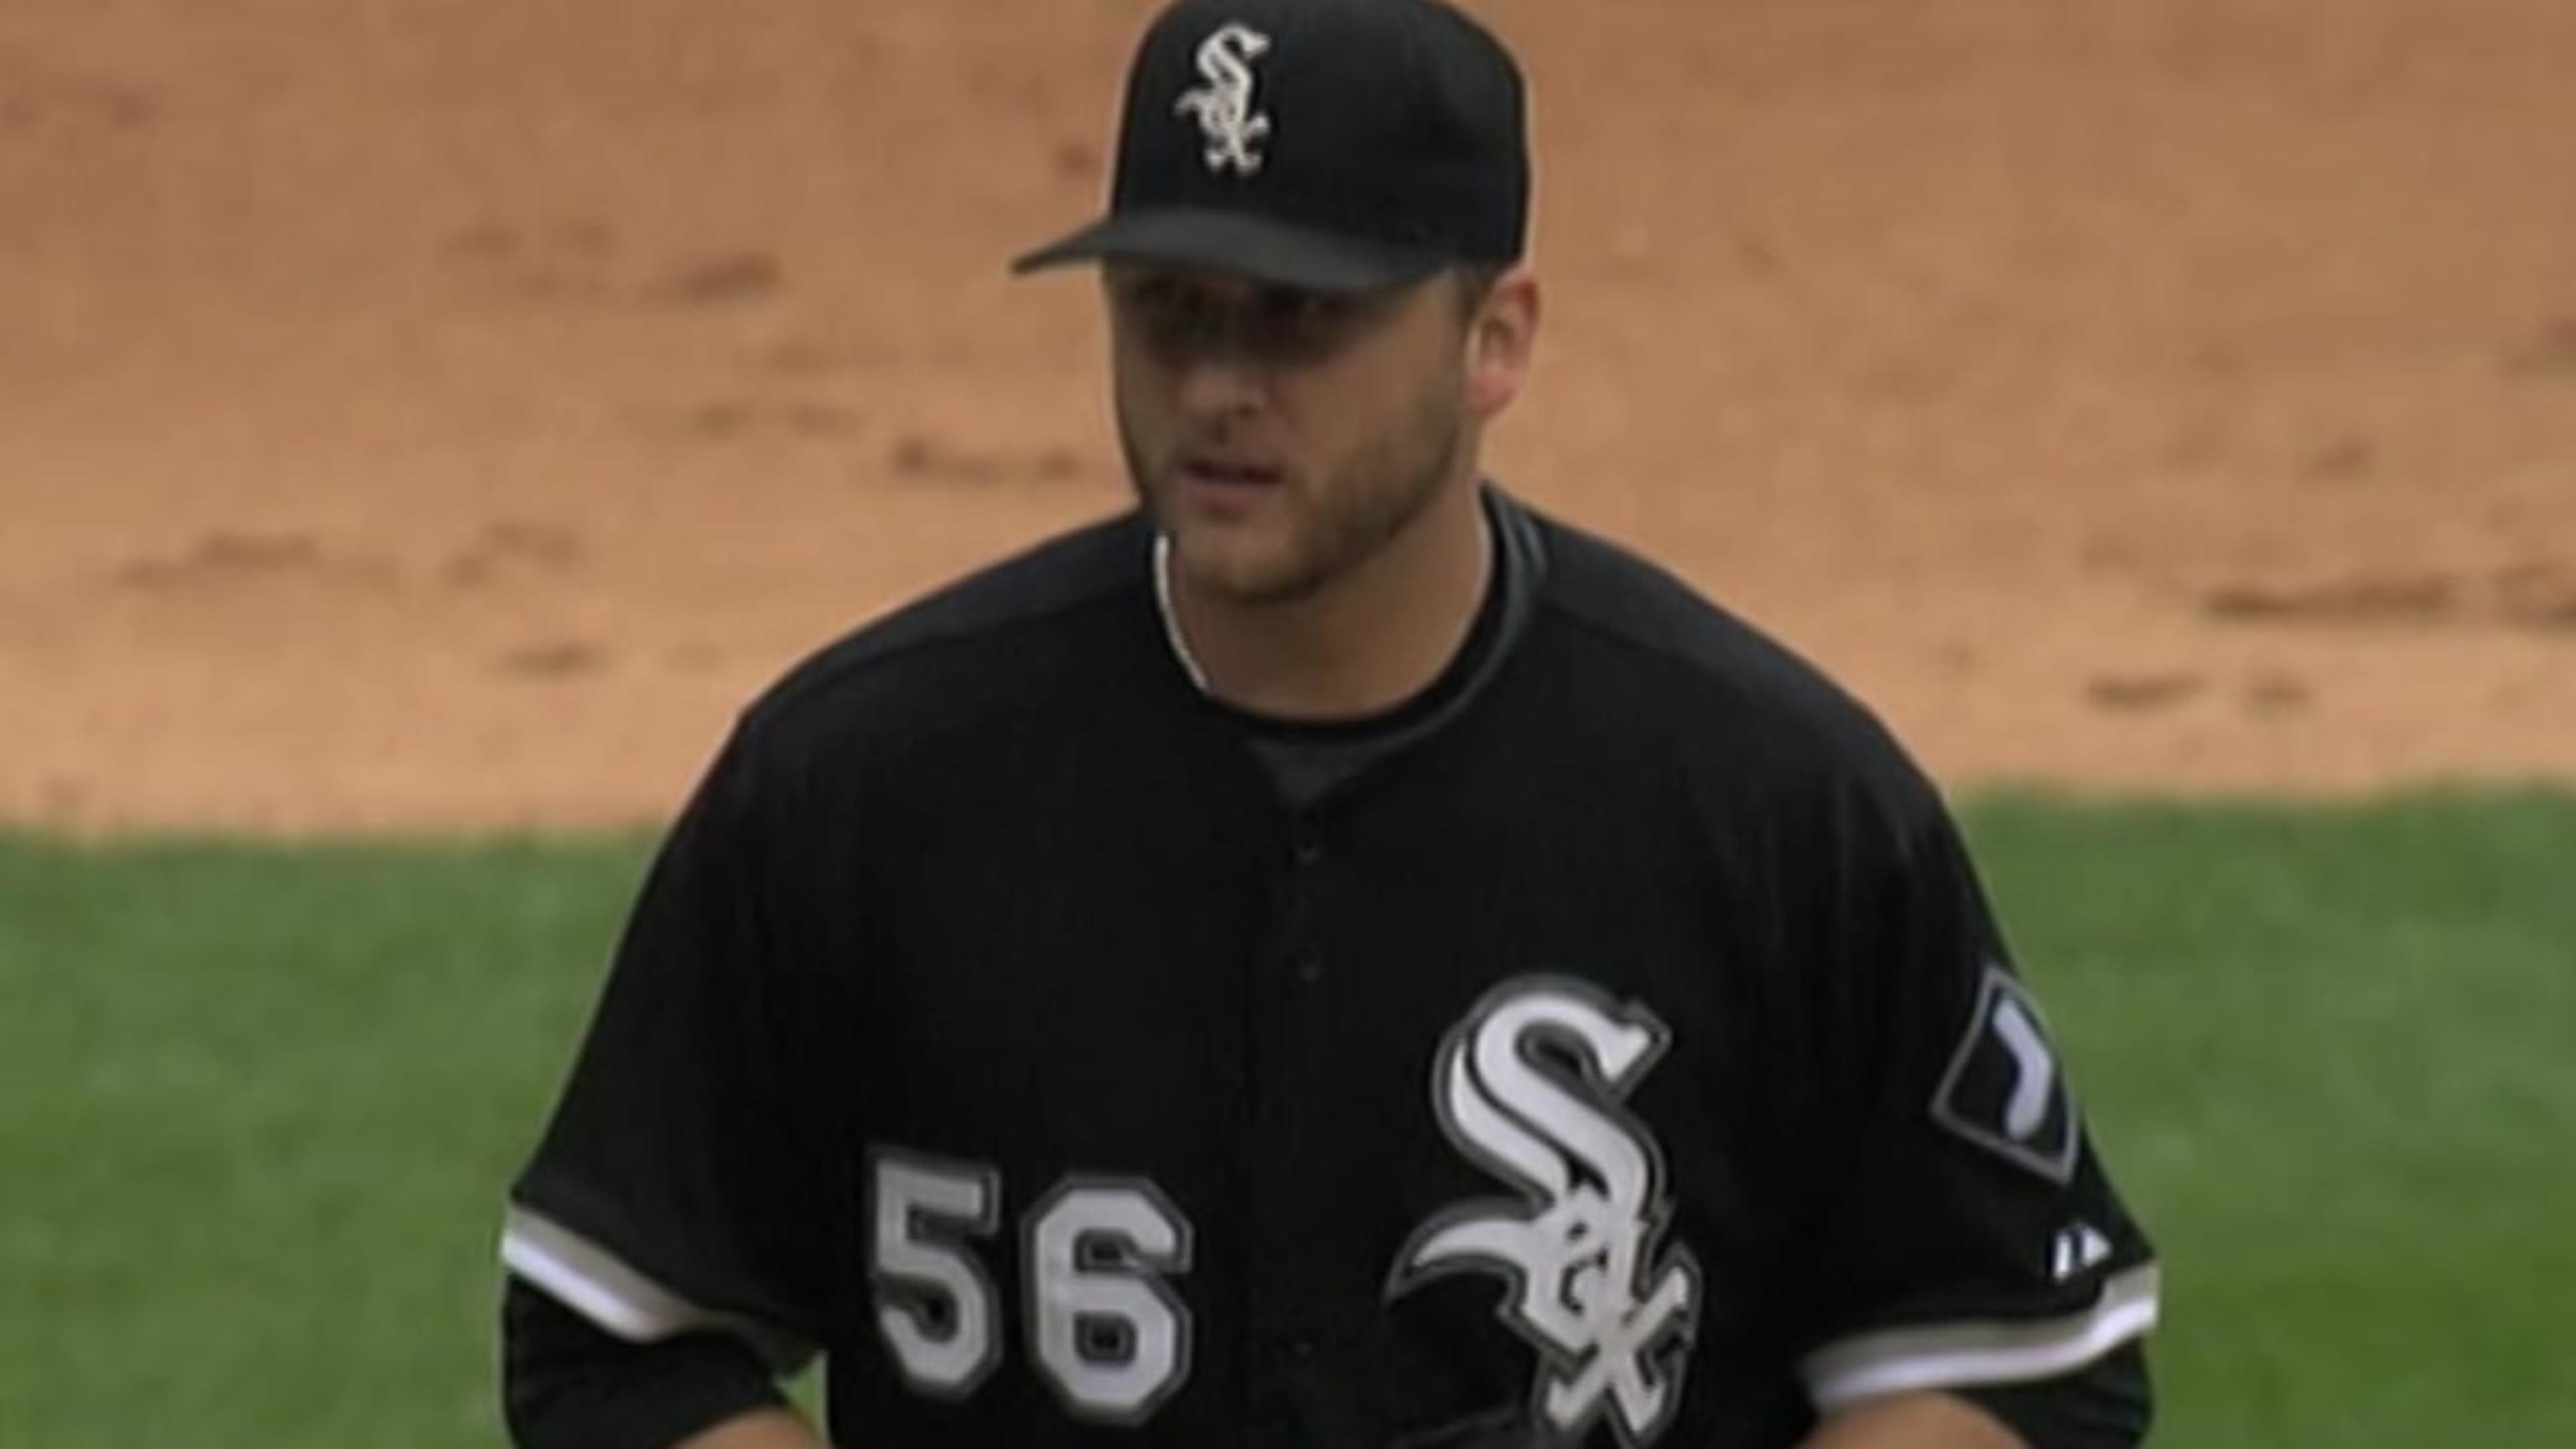 Sox ace Buehrle hurls perfect game at Rays